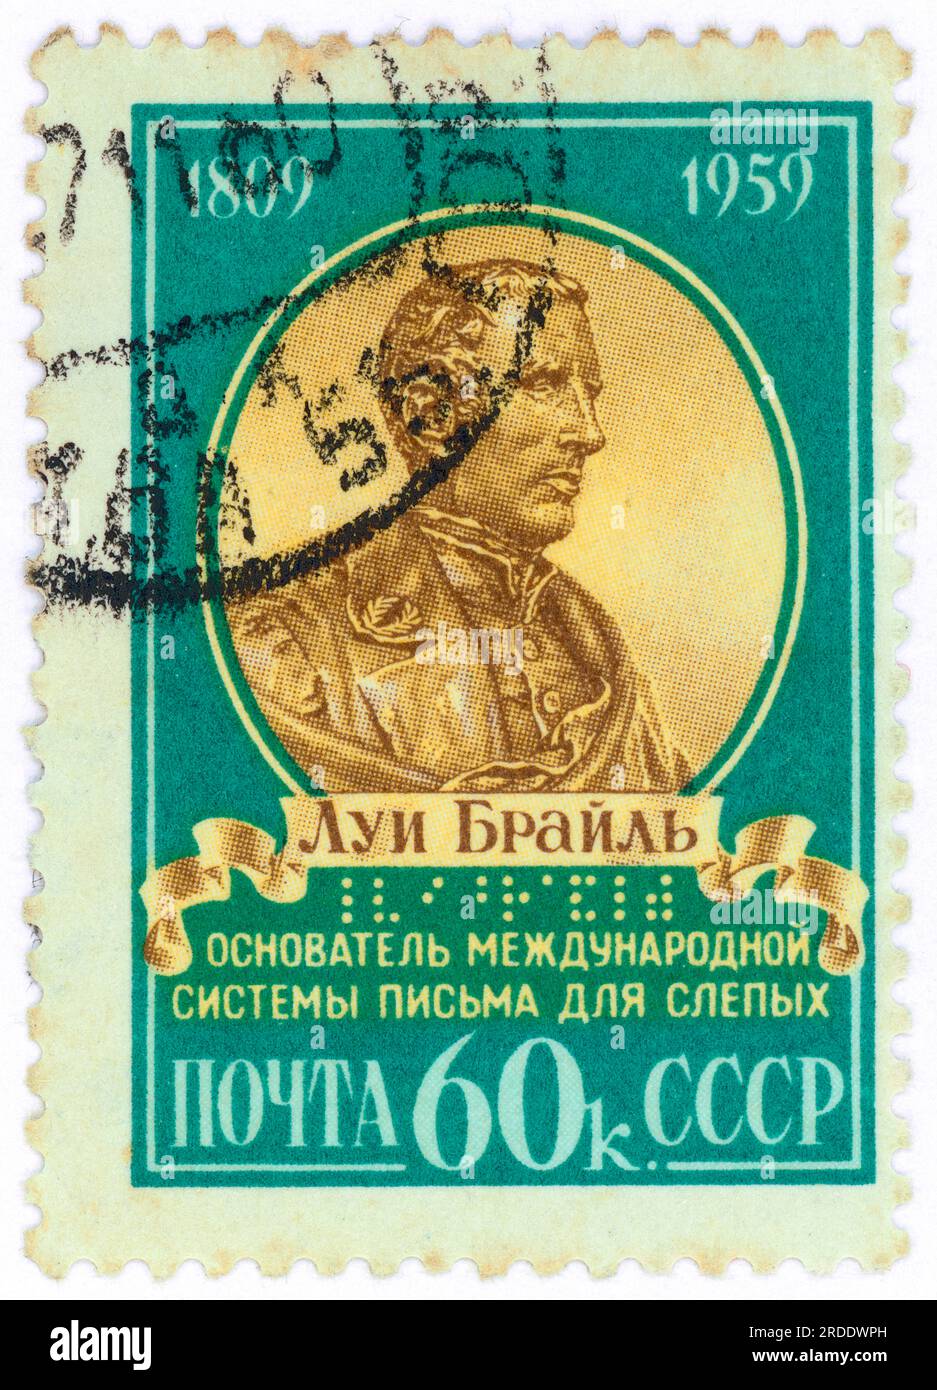 Louis Braille (1809 – 1852). Postage stamp issued in the USSR in 1959 on the 100th anniversary of Braille's birth. Louis Braille was a French educator and the inventor of a reading and writing system, named braille after him, intended for use by visually impaired people. His system is used worldwide and remains virtually unchanged to this day. Stock Photo